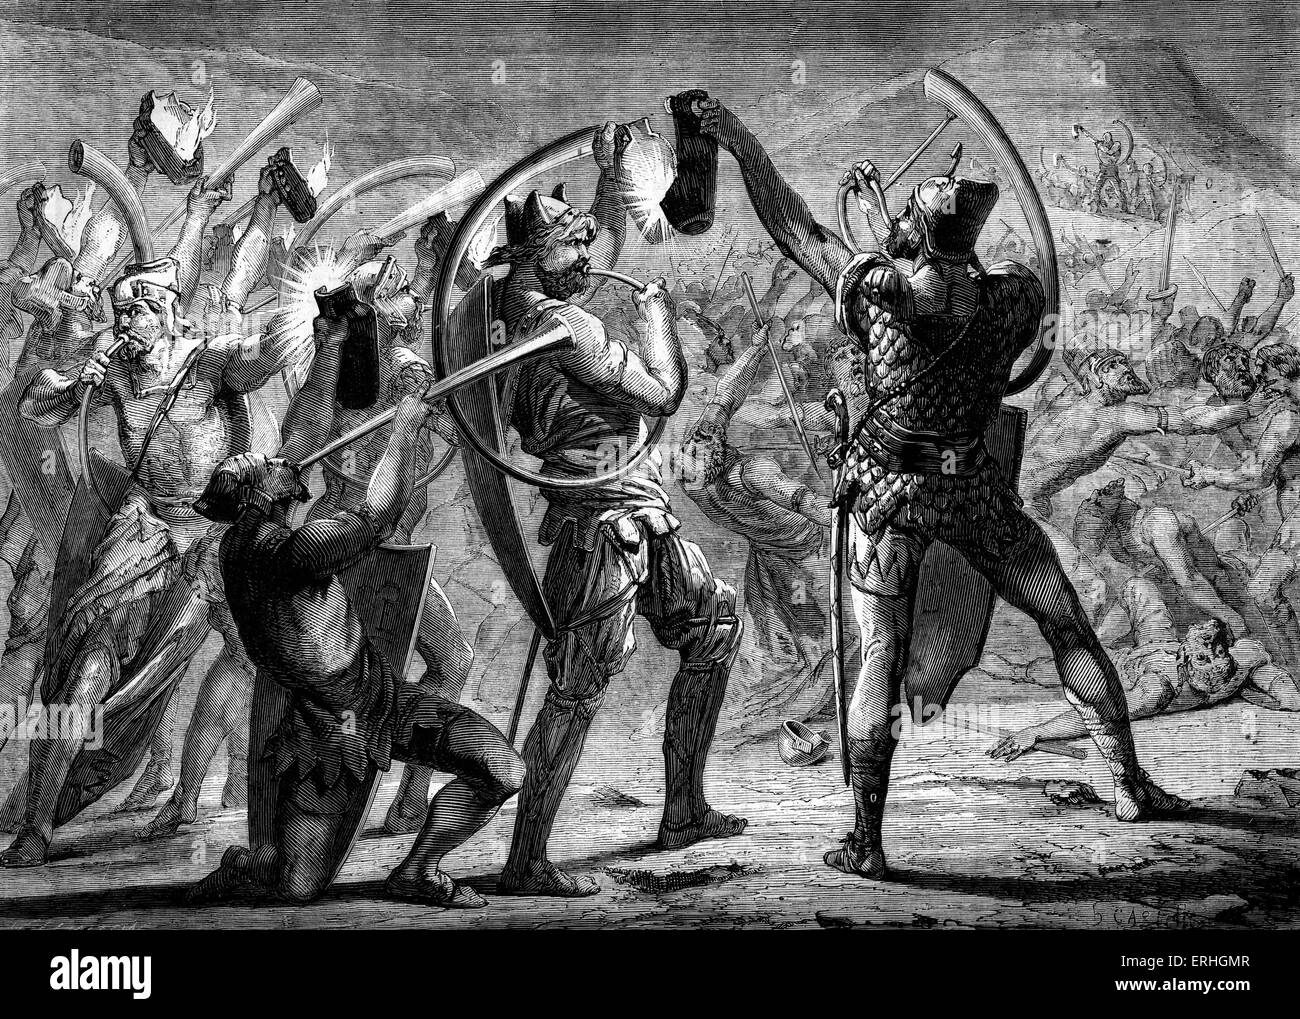 Gideon attacking the Midianites - illustration of Gideon and his followers suprising the army of the Midianites with lamps and Stock Photo